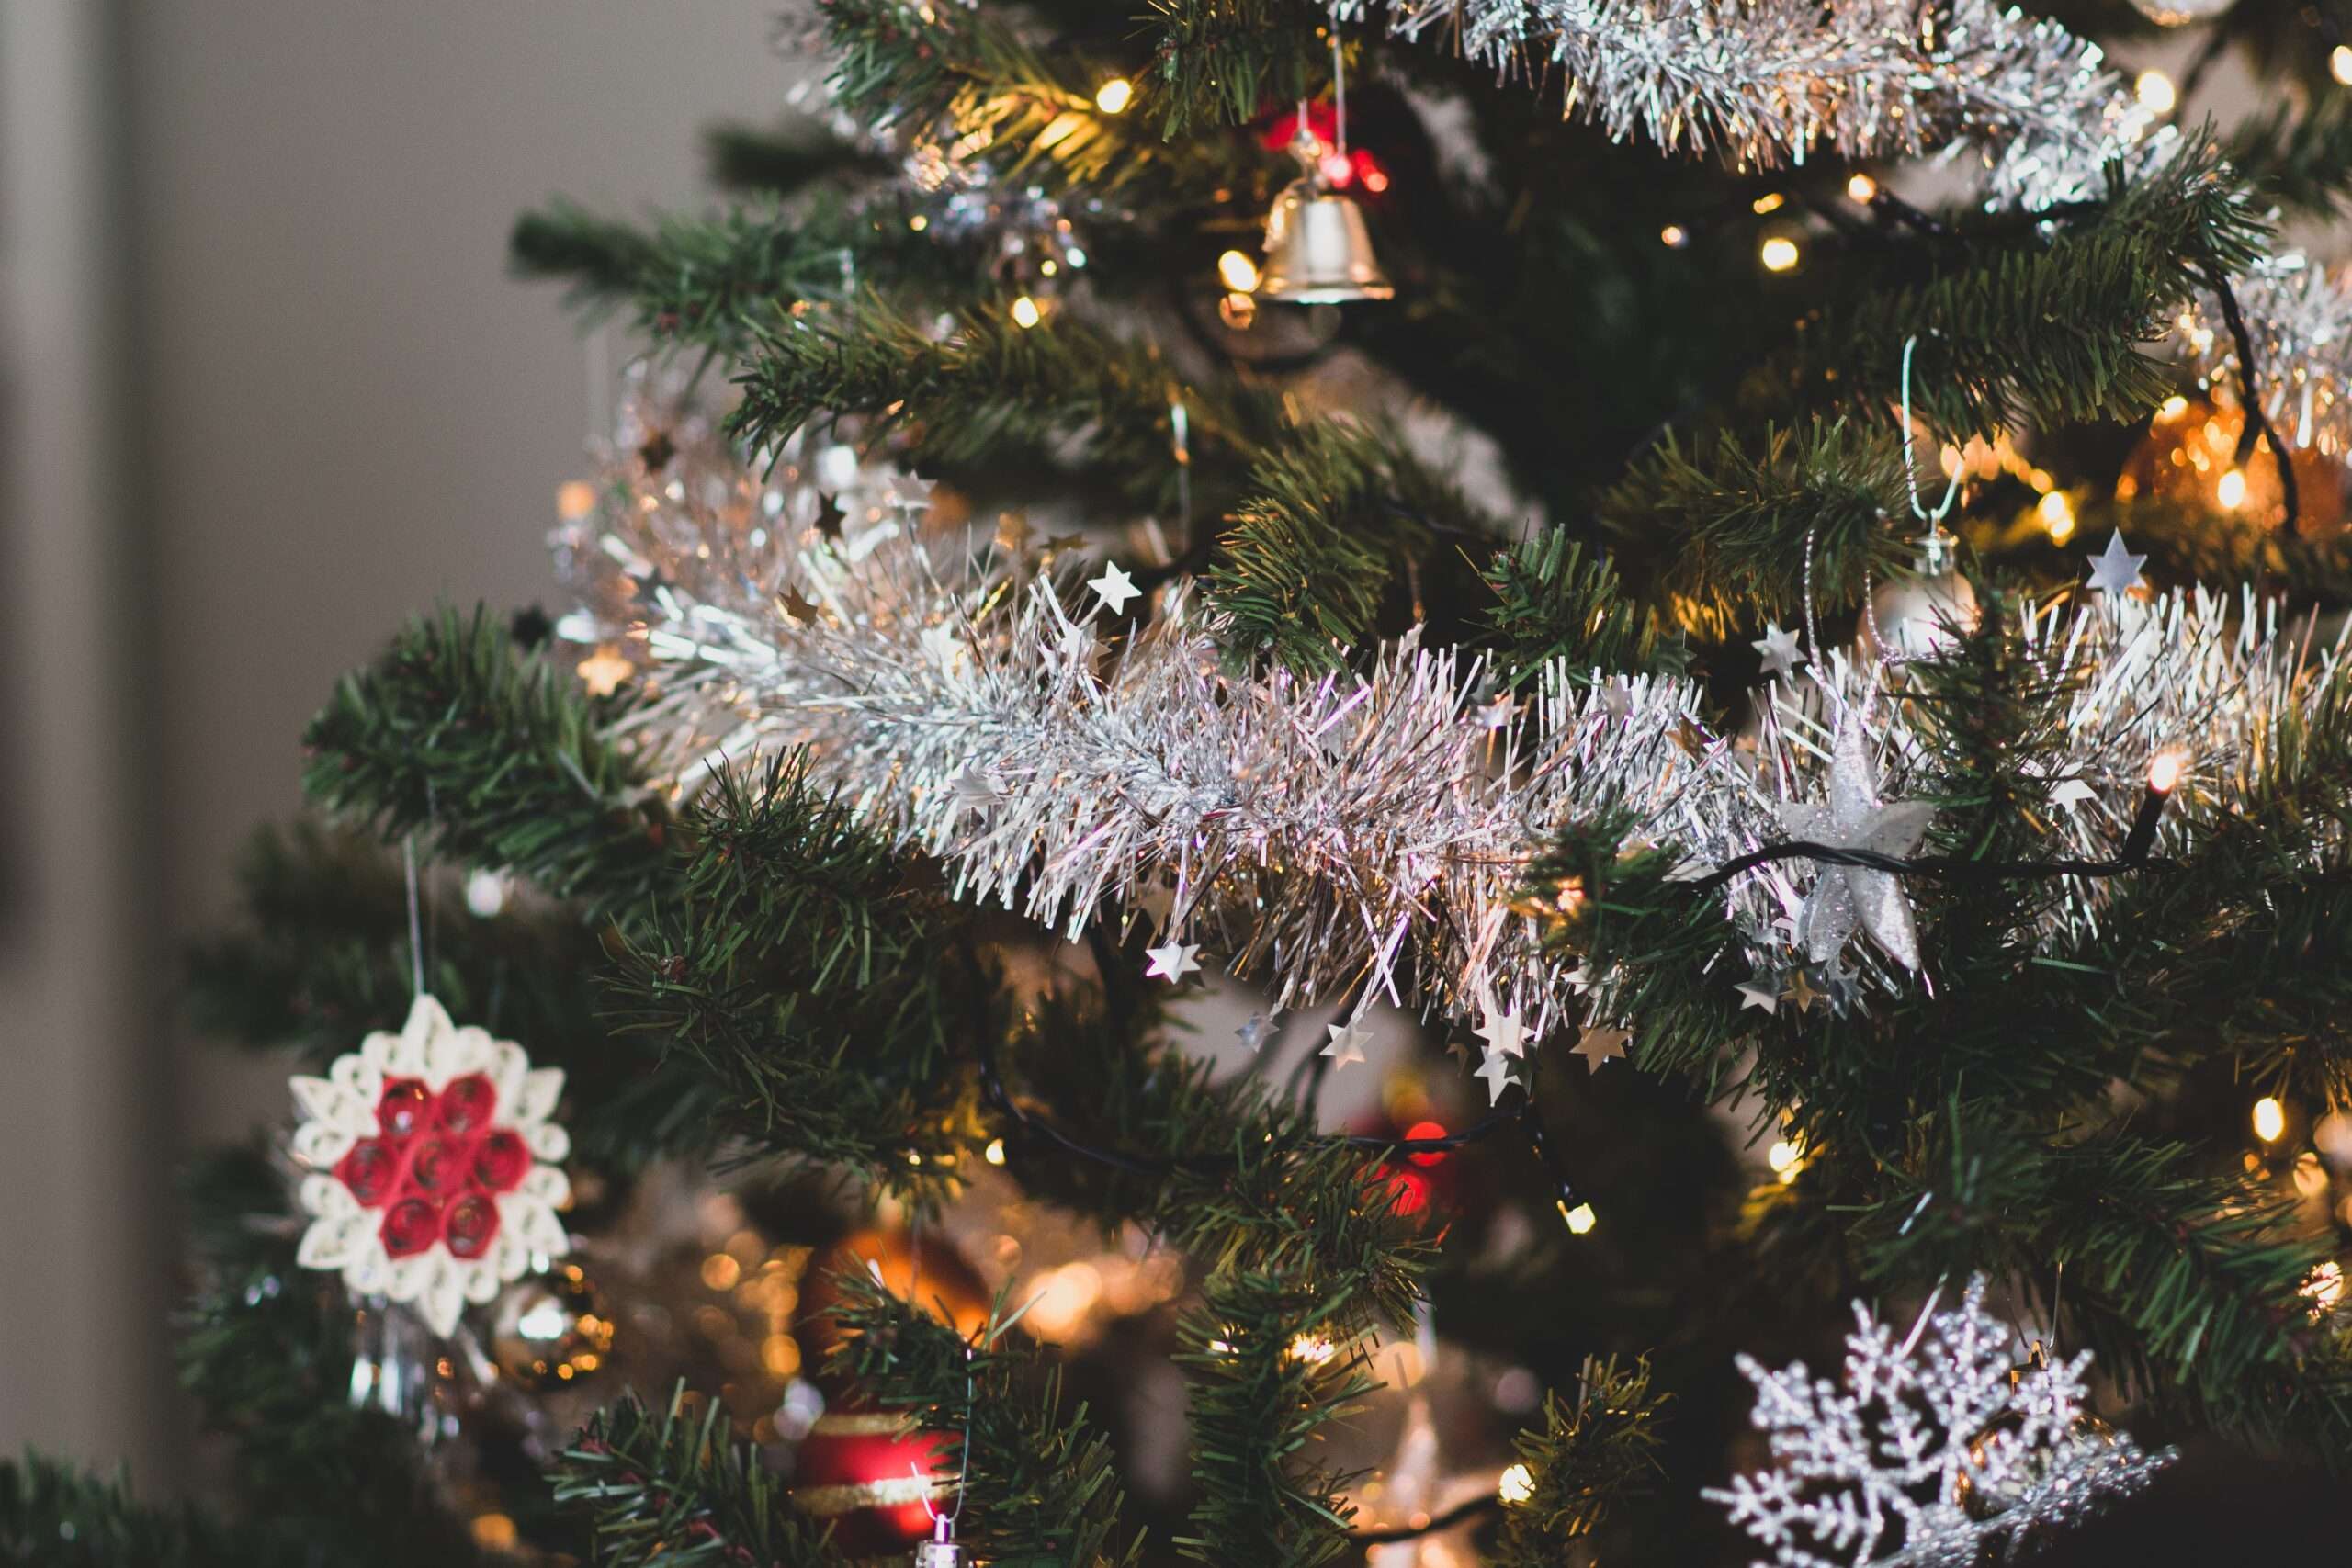 Wellbeing rules for the festive season